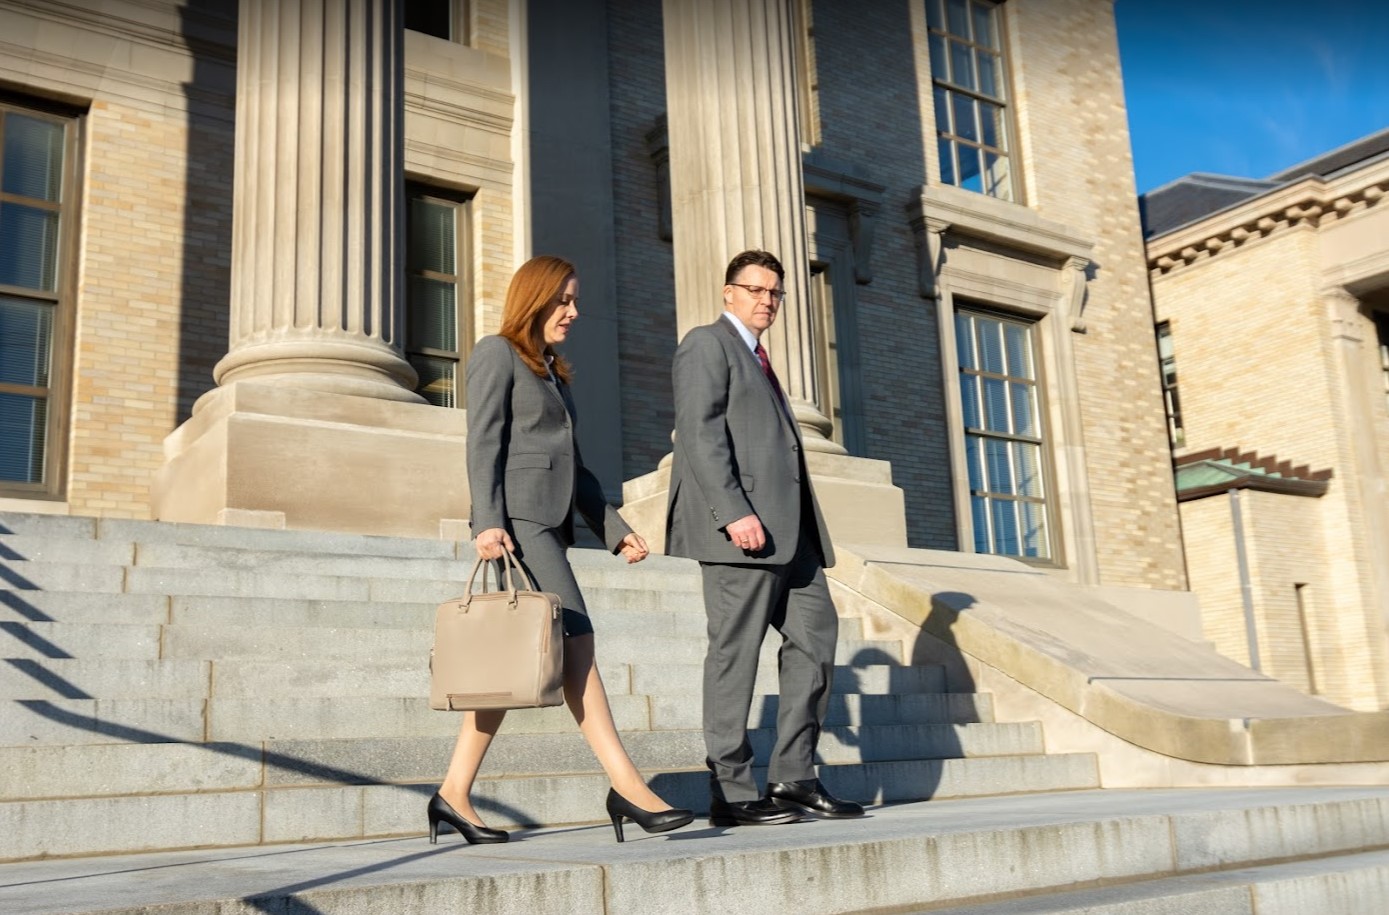 In personal injury case preparation, our lawyers are known for thoroughness that few law firms can match. We leave no stone unturned and diligently line up experts, gather evidence, research the law, and craft a plan to pursue justice for our clients.